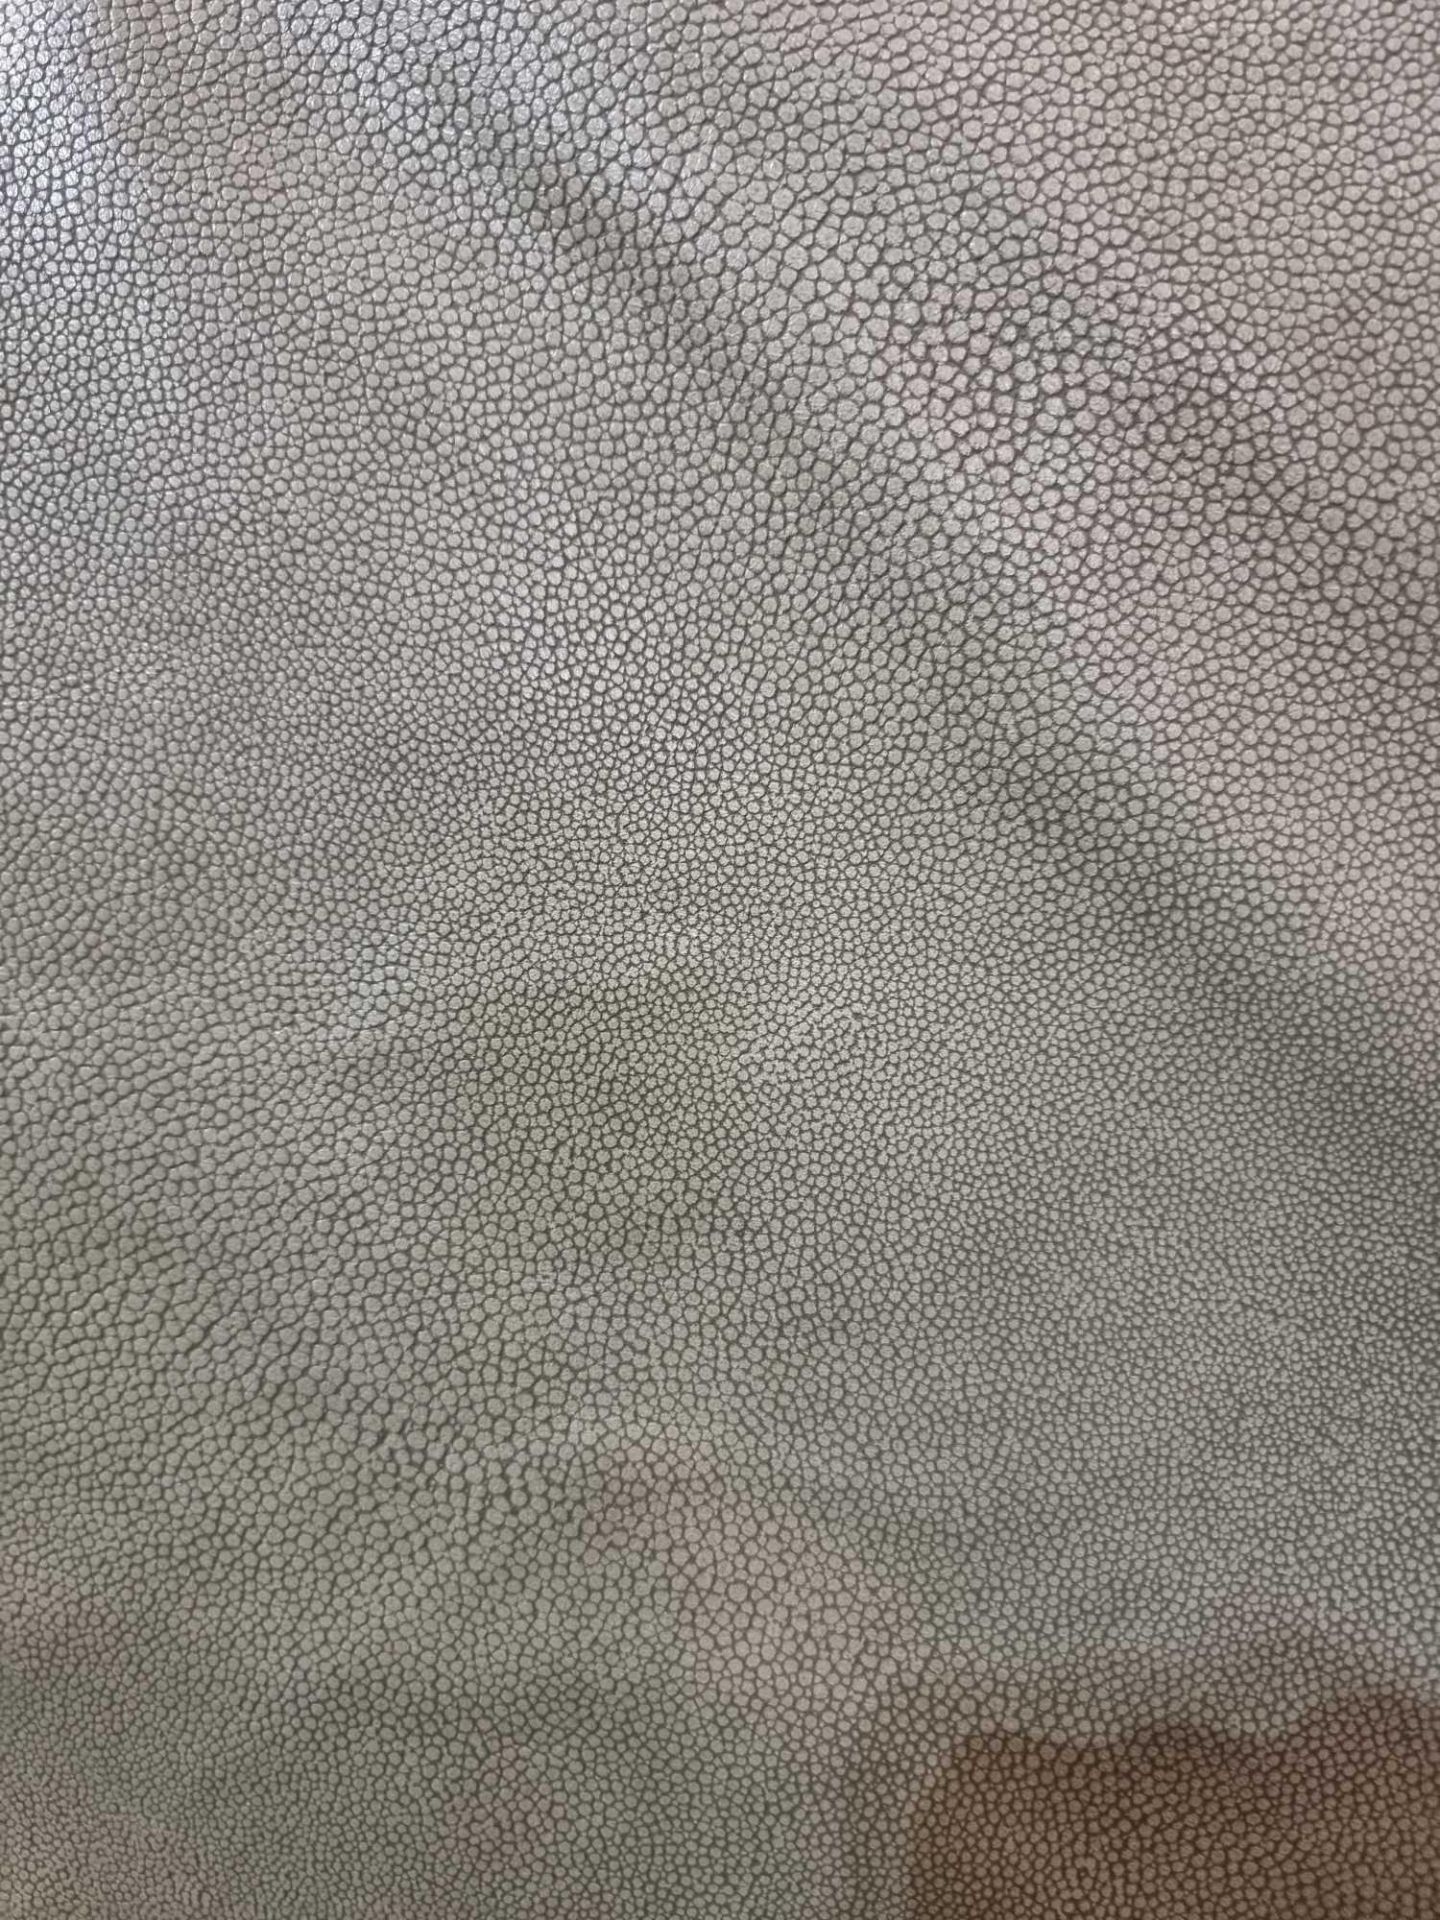 Sage Leather Hide approximately 4 62M2 2 2 x 2 1cm ( Hide No,188) - Image 4 of 5